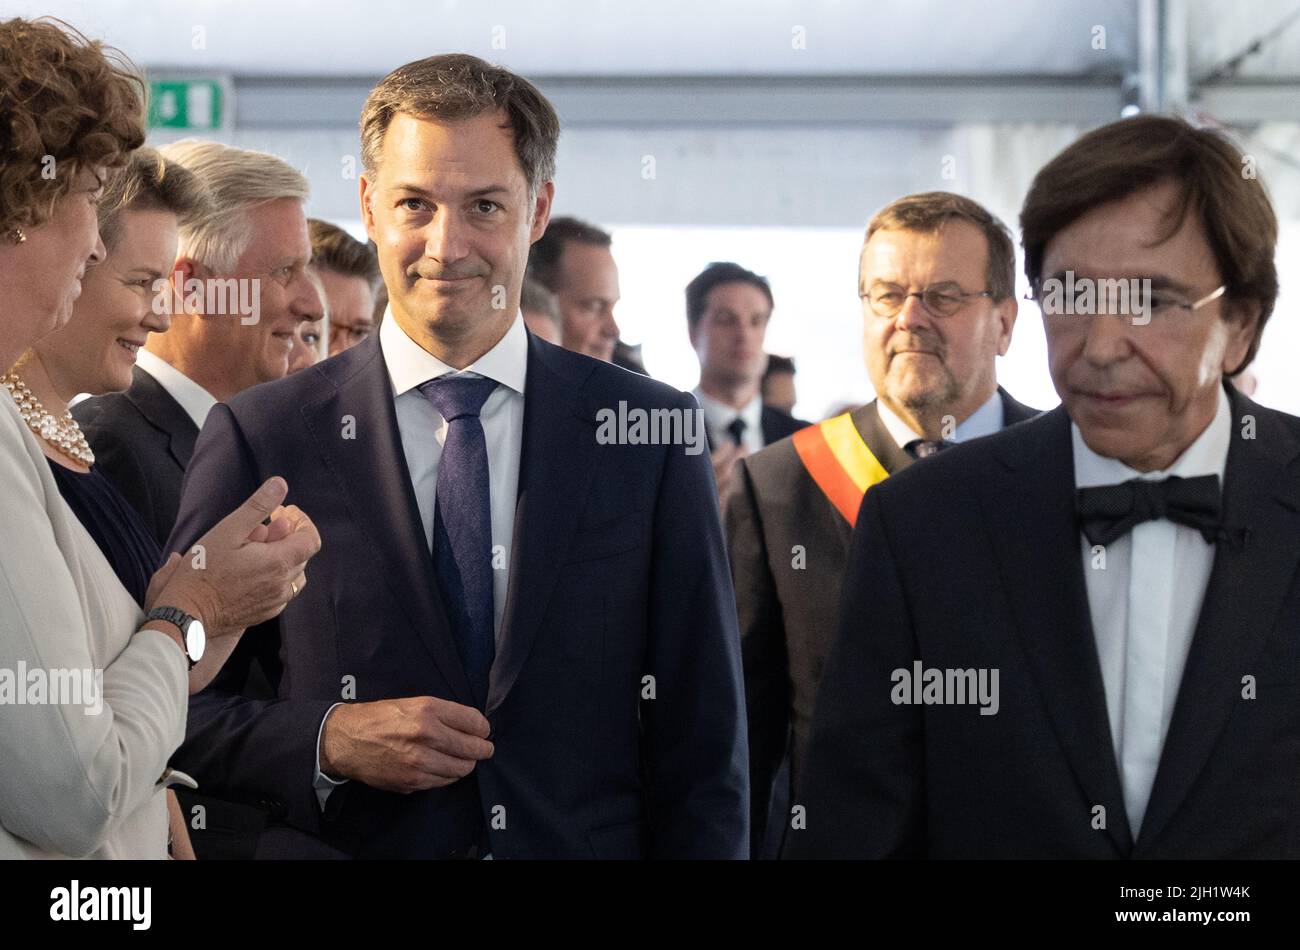 Queen Mathilde of Belgium, King Philippe - Filip of Belgium, Prime Minister Alexander De Croo, Liege mayor Willy Demeyer and Walloon Minister President Elio Di Rupo pictured during a tribute ceremony for those who died during the floods, with the King and Queen of Belgium, one year after the devastating floods that touched the region, Thursday 14 July 2022, in Limburg. July 14 will mark the first anniversary of the terrible floods that hit Wallonia last summer. In July 2021 - on the 14th and 15th - a real torrent poured over several Walloon municipalities, mainly in the provinces of Liege, Nam Stock Photo